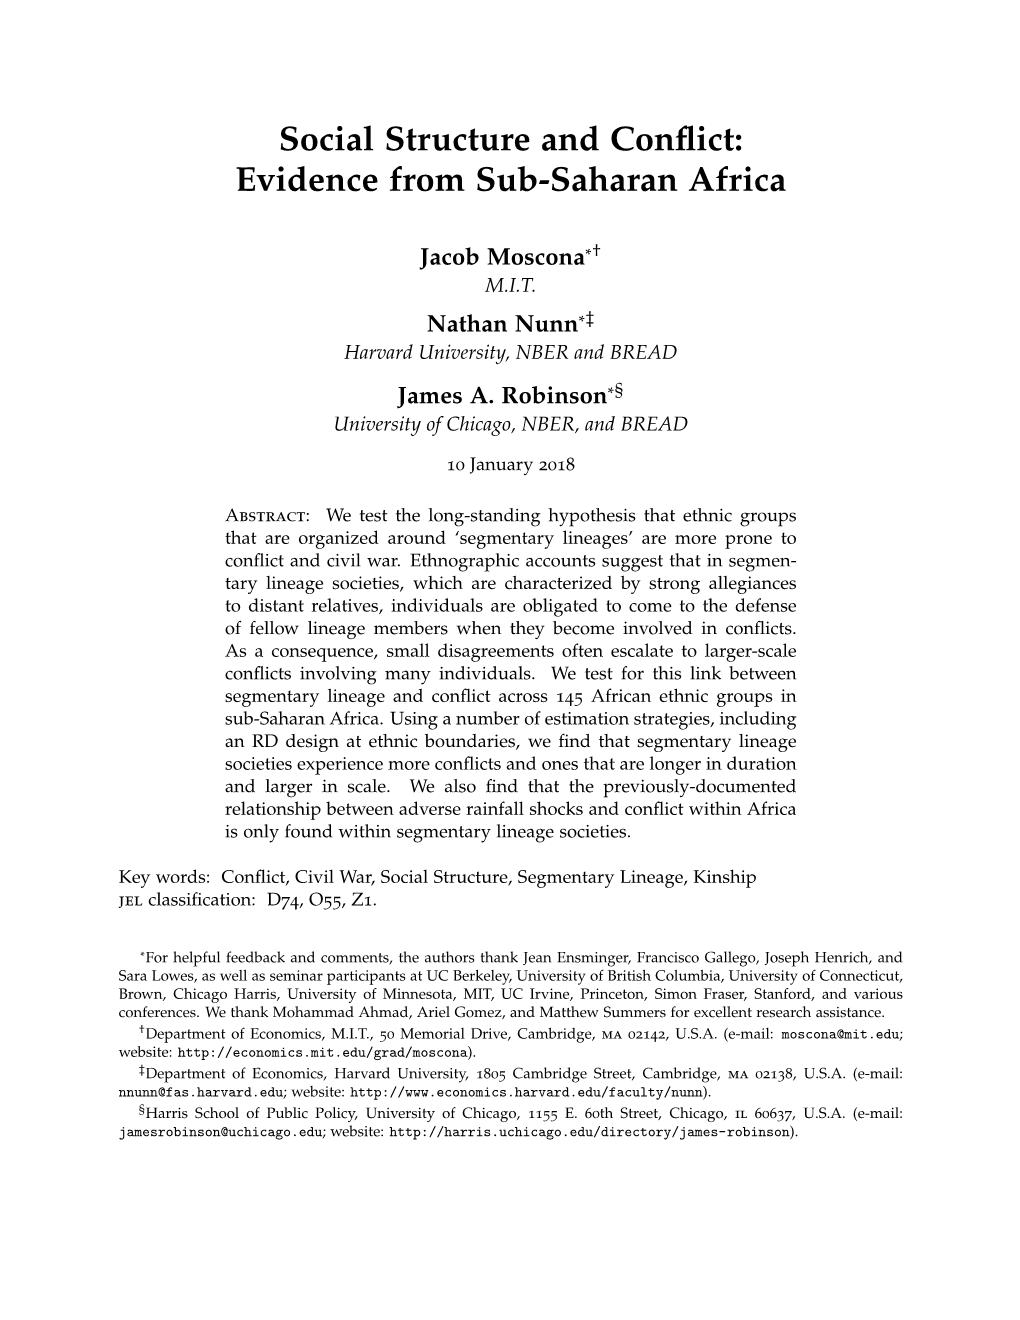 Social Structure and Conflict: Evidence from Sub-Saharan Africa